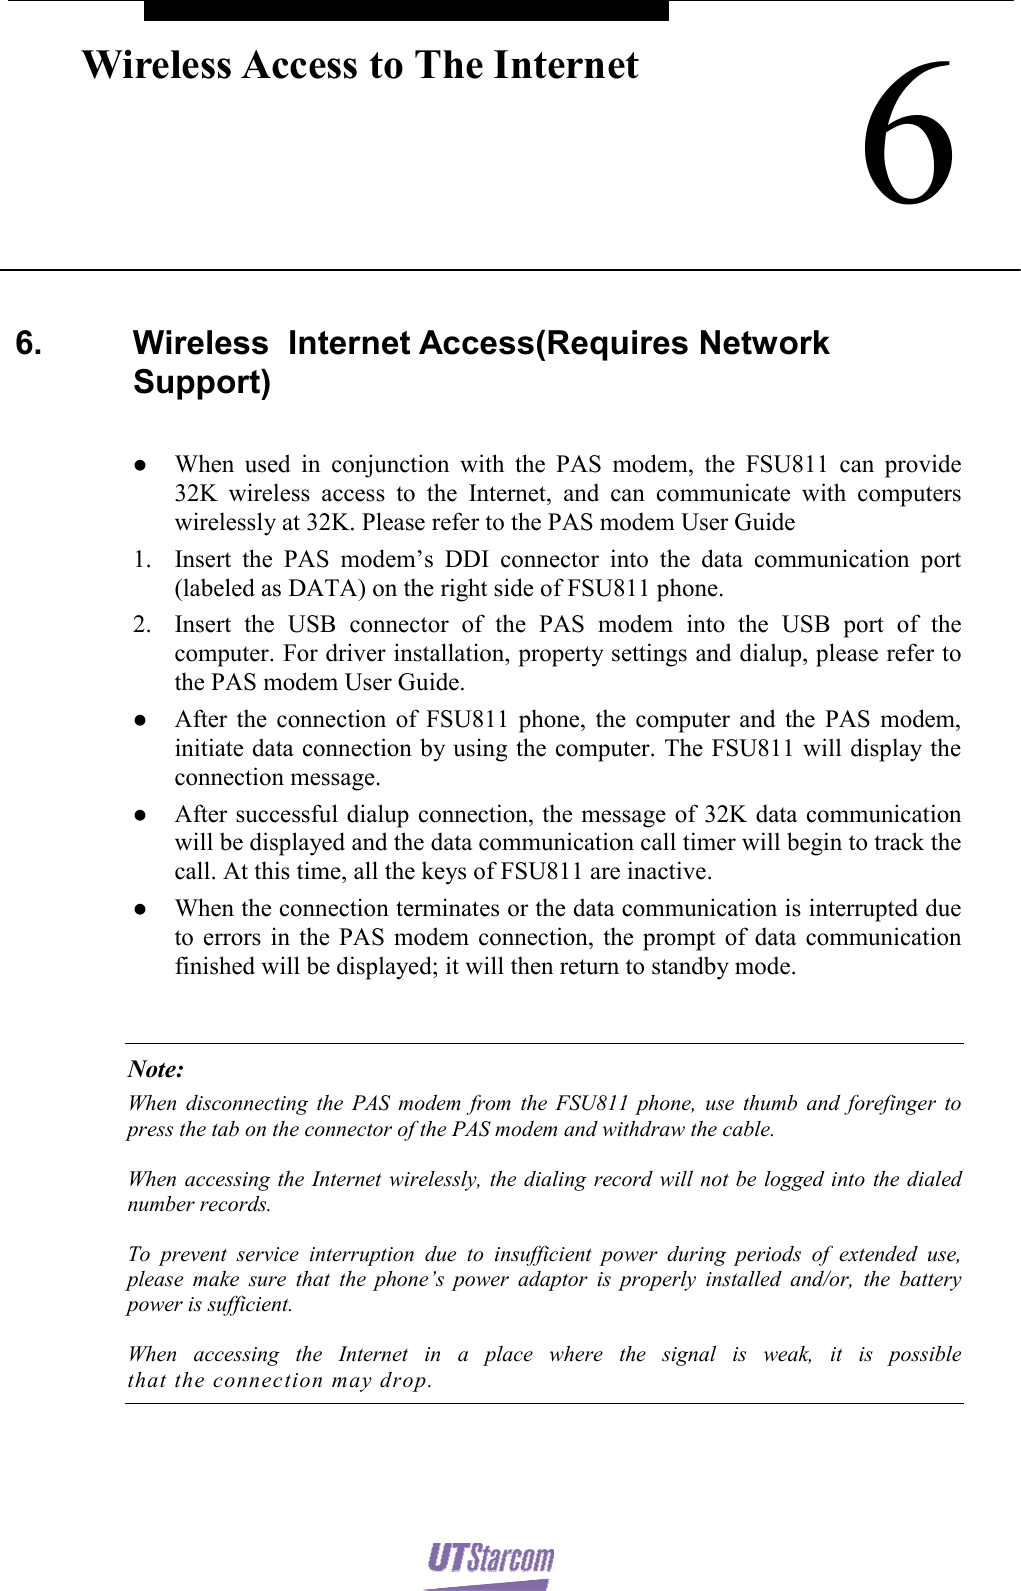    6Wireless Access to The Internet 6.  Wireless  Internet Access(Requires Network Support)  z When used in conjunction with the PAS modem, the FSU811 can provide 32K wireless access to the Internet, and can communicate with computers wirelessly at 32K. Please refer to the PAS modem User Guide 1. Insert the PAS modem’s DDI connector into the data communication port (labeled as DATA) on the right side of FSU811 phone. 2. Insert the USB connector of the PAS modem into the USB port of the computer. For driver installation, property settings and dialup, please refer to the PAS modem User Guide. z After the connection of FSU811 phone, the computer and the PAS modem, initiate data connection by using the computer. The FSU811 will display the connection message. z After successful dialup connection, the message of 32K data communication will be displayed and the data communication call timer will begin to track the call. At this time, all the keys of FSU811 are inactive. z When the connection terminates or the data communication is interrupted due to errors in the PAS modem connection, the prompt of data communication finished will be displayed; it will then return to standby mode.  Note: When disconnecting the PAS modem from the FSU811 phone, use thumb and forefinger to press the tab on the connector of the PAS modem and withdraw the cable. When accessing the Internet wirelessly, the dialing record will not be logged into the dialed number records. To prevent service interruption due to insufficient power during periods of extended use, please make sure that the phone’s power adaptor is properly installed and/or, the battery power is sufficient.  When accessing the Internet in a place where the signal is weak, it is possible that the connection may drop.